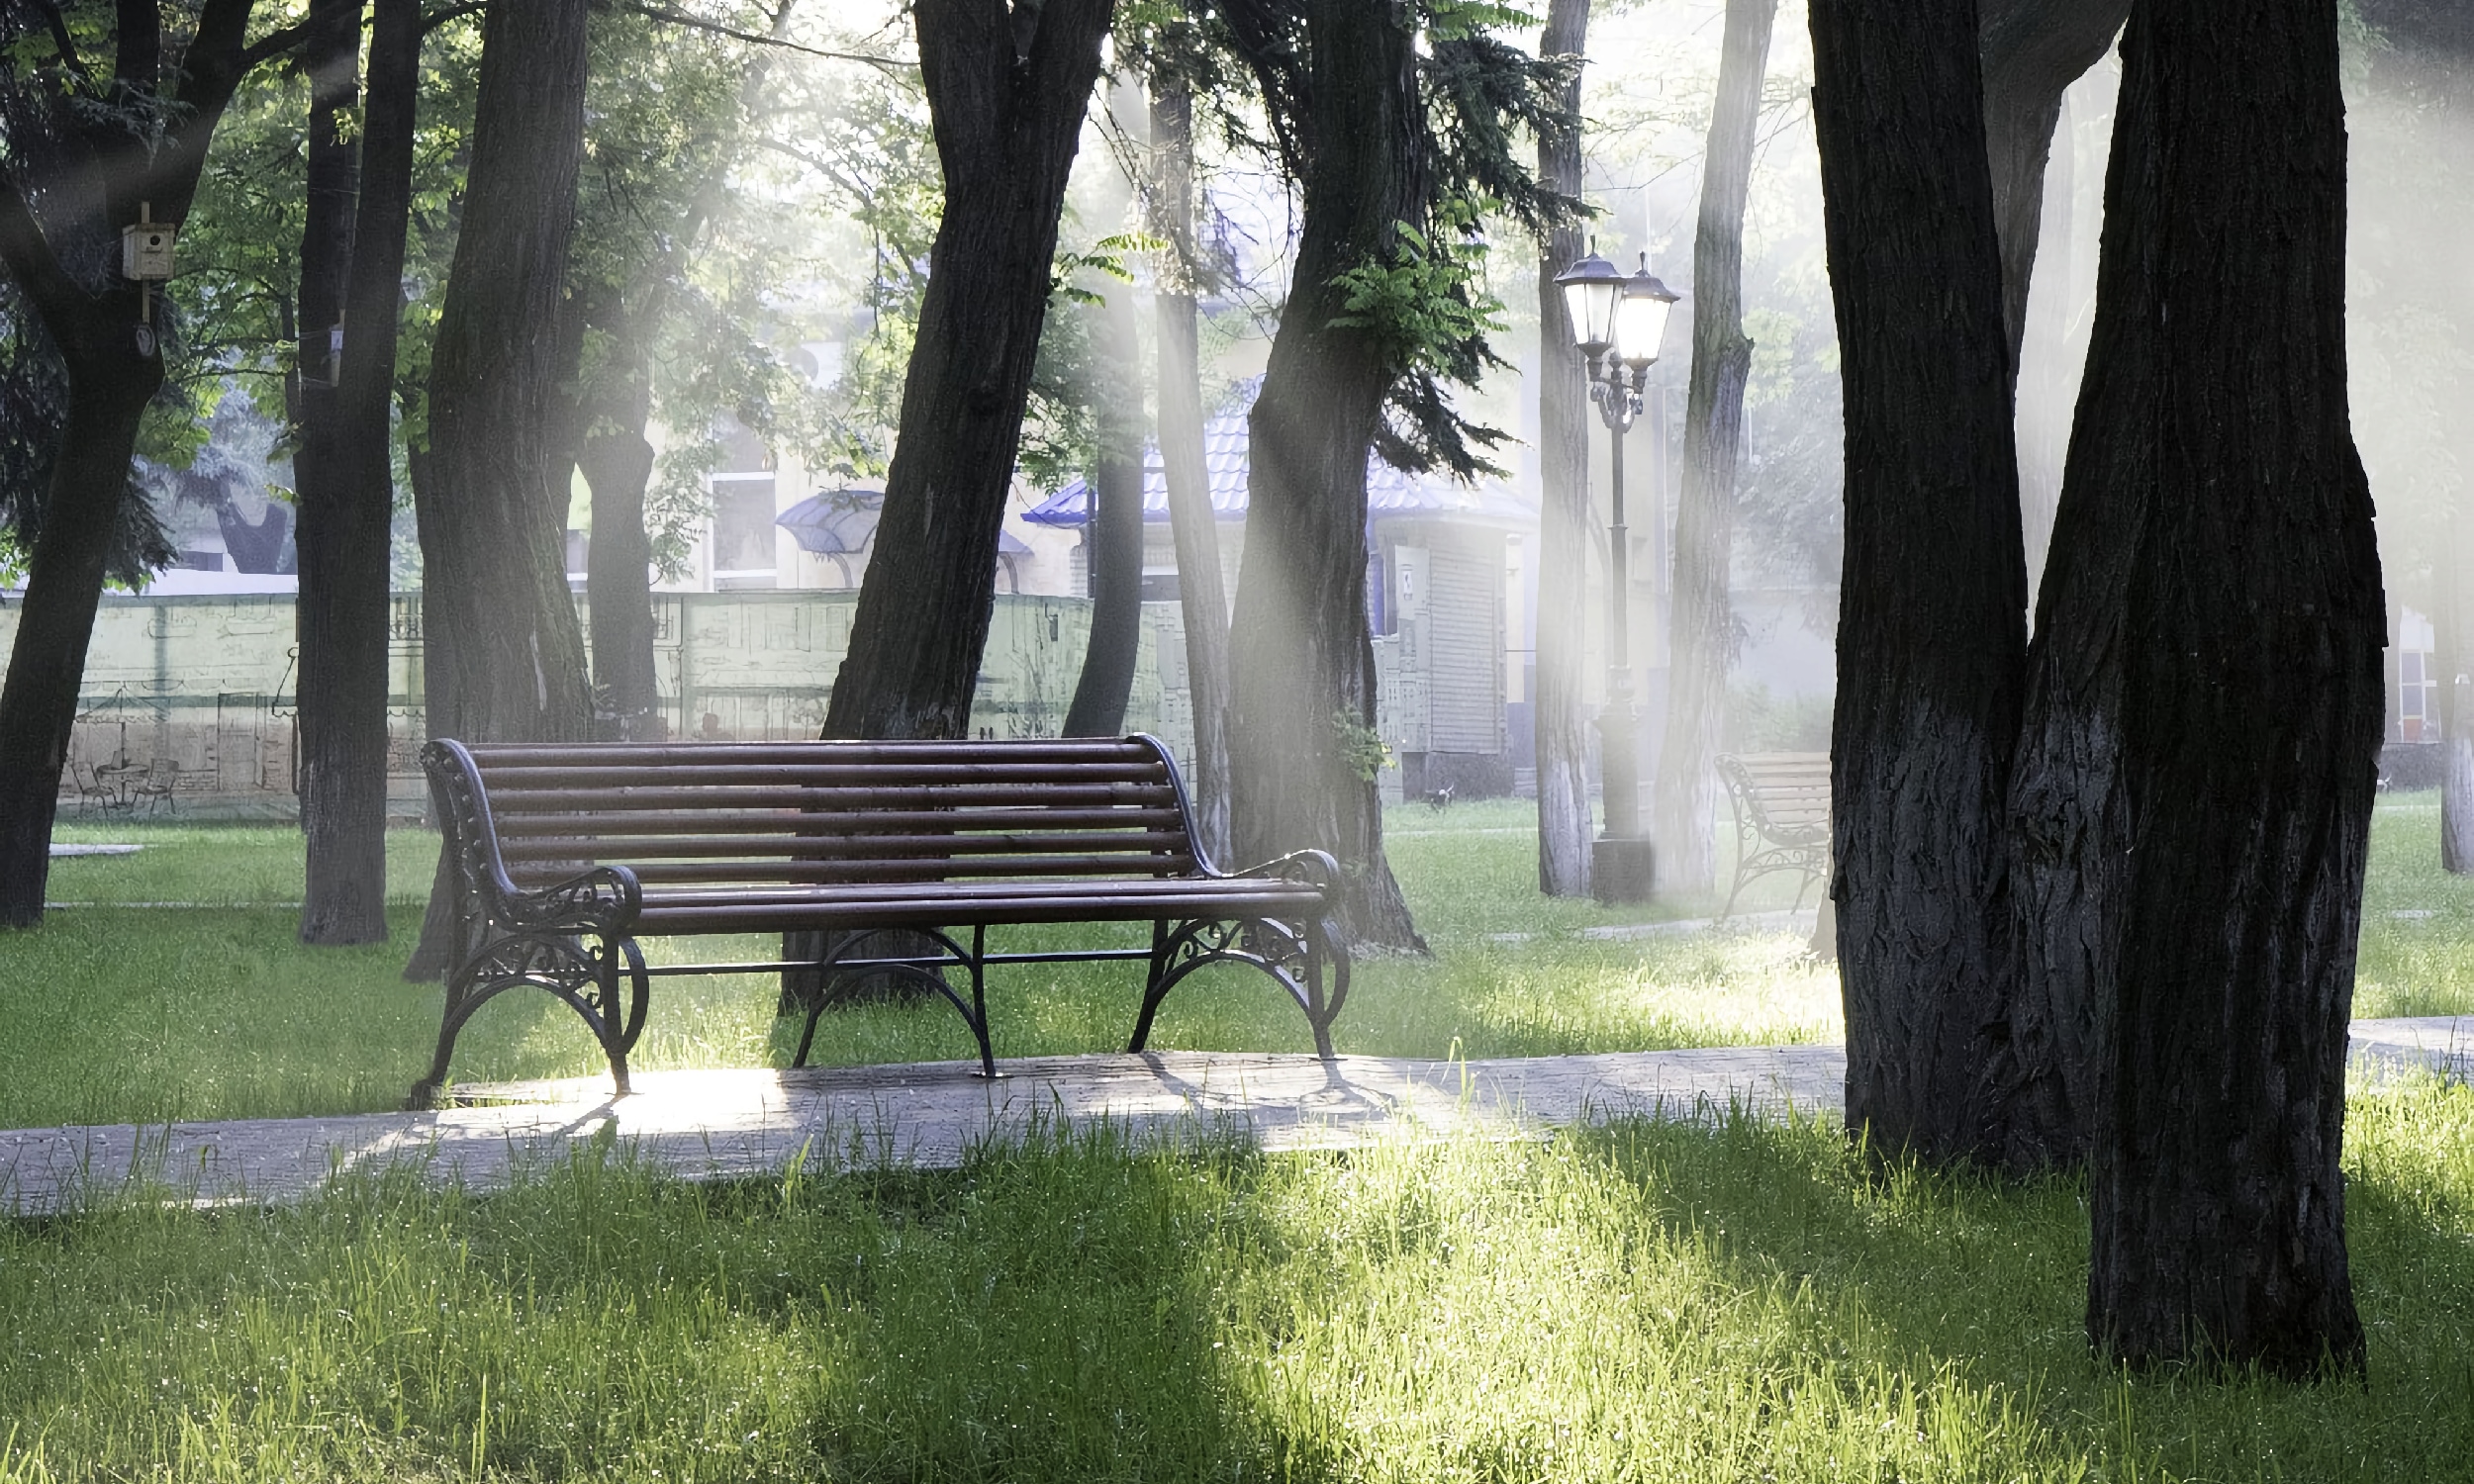 A park bench, in a city park, surrounded by trees, sunlight shining on the area